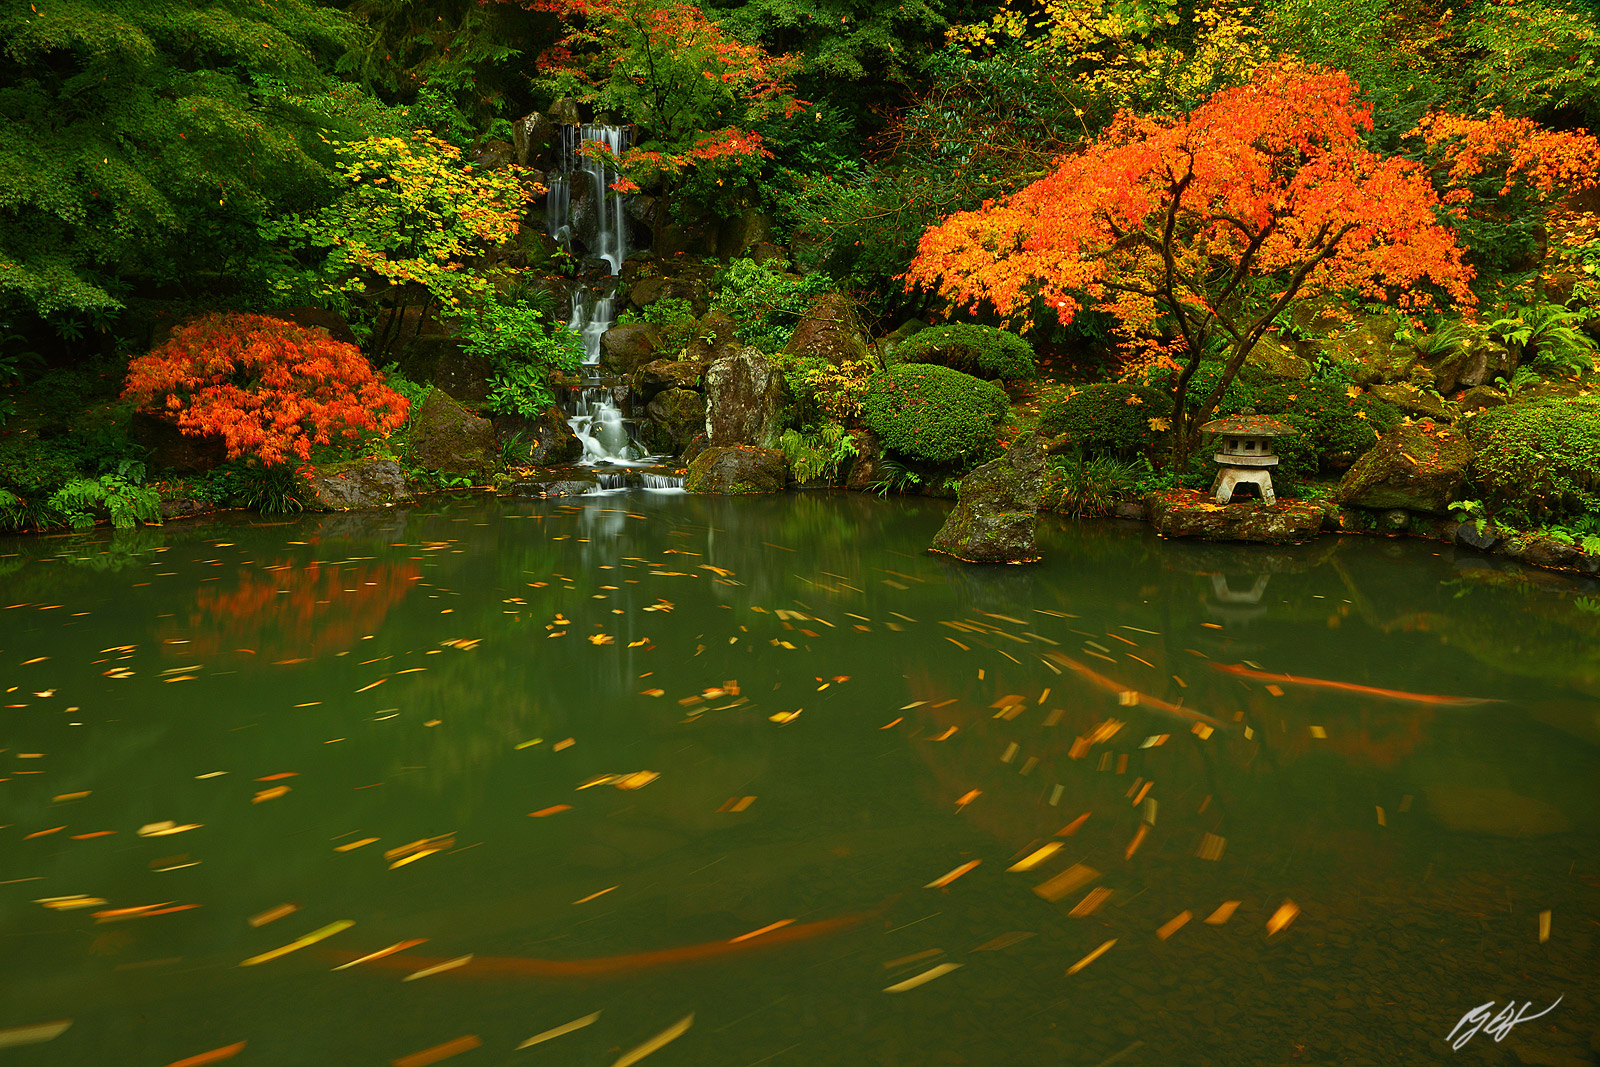 Fall Color and Koi Pond with a Waterfall in the Portland Japanese Garden in Oregon